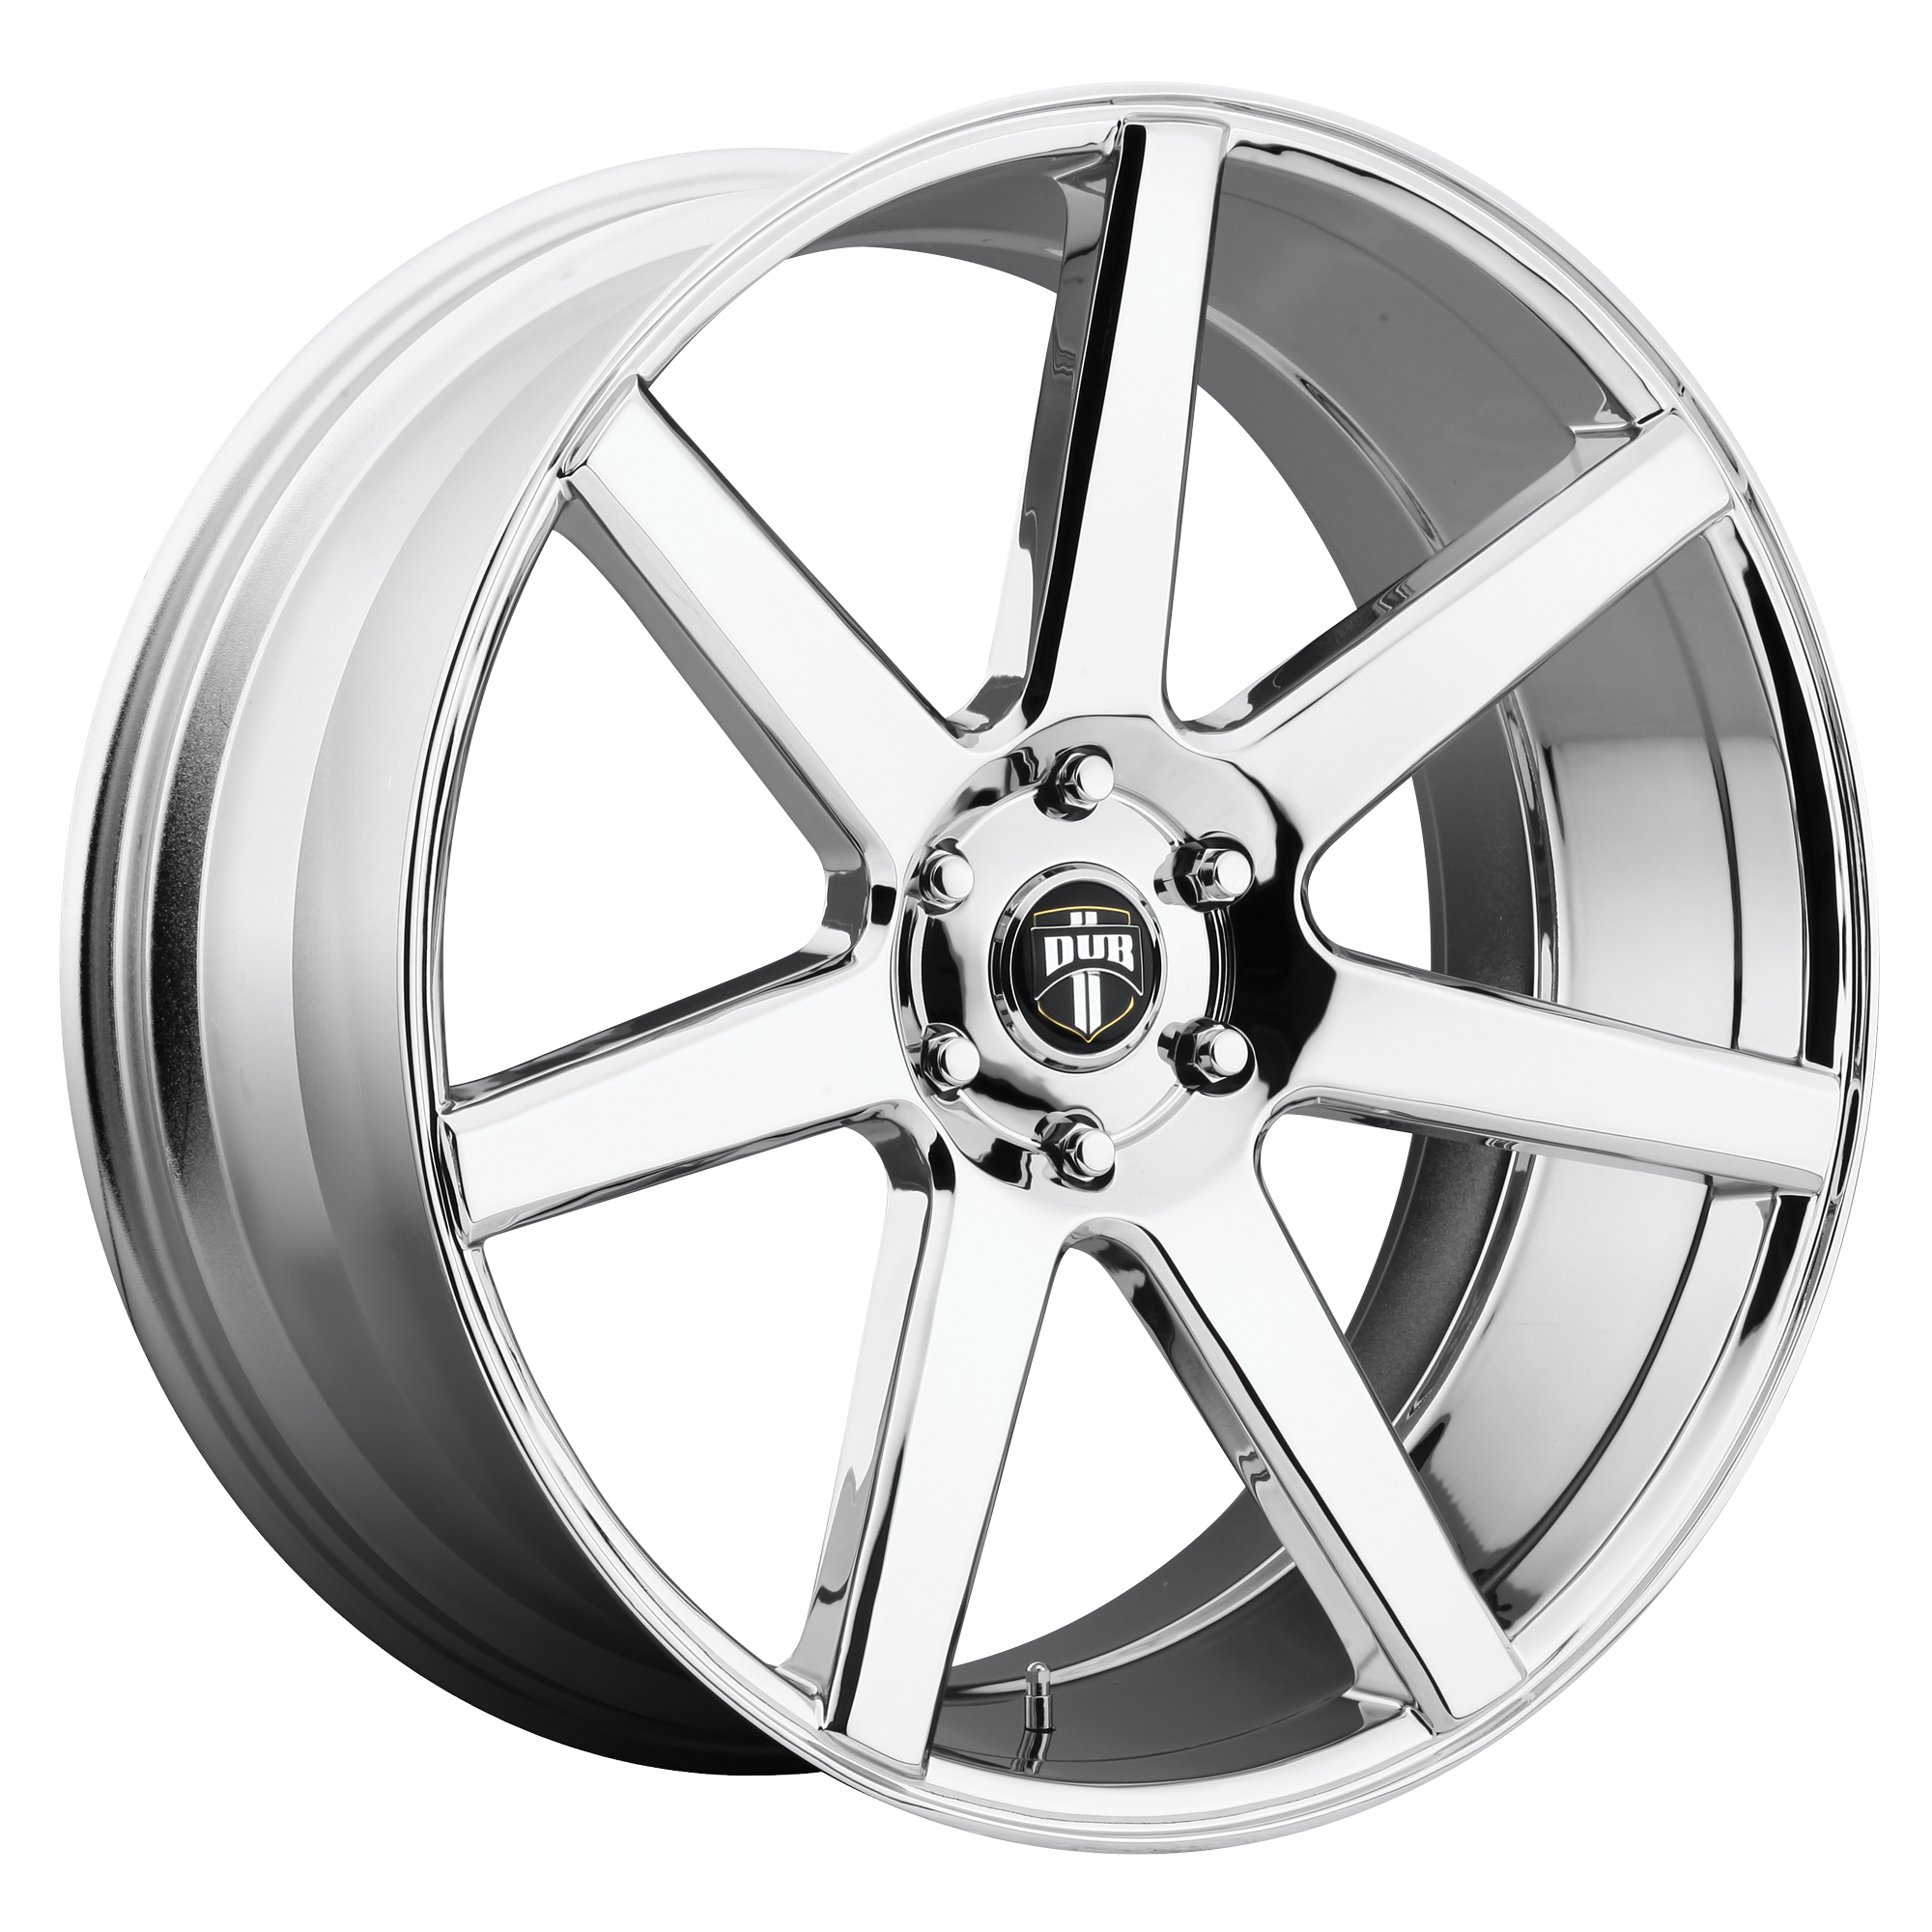 FUTURE 22x9.5 6x139.70 CHROME PLATED (19 mm) - Tires and Engine Performance